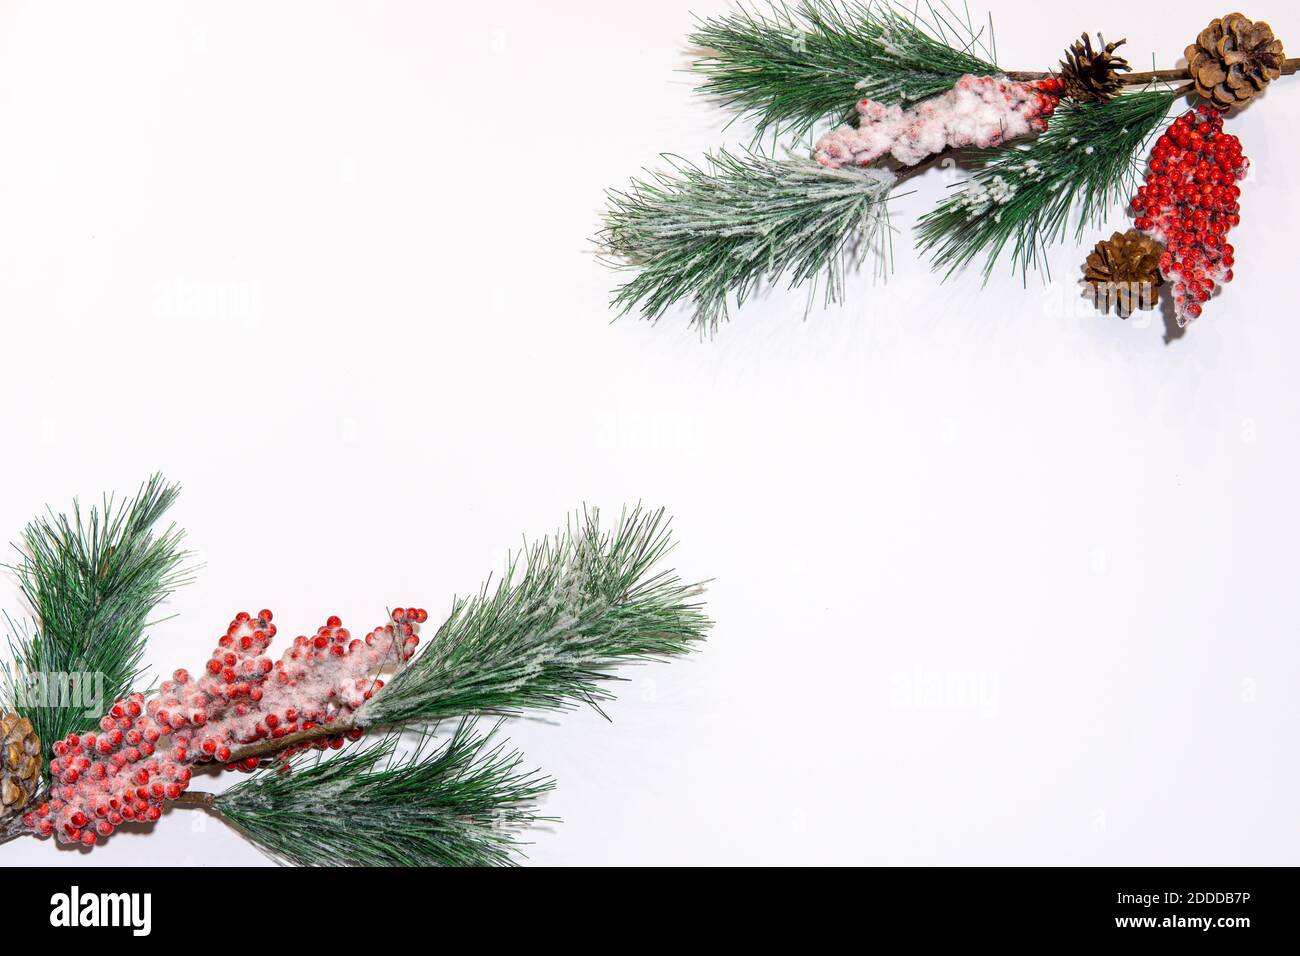 Christmas composition. Fir tree branches on white background. Christmas, winter, new year concept. Flat lay Stock Photo